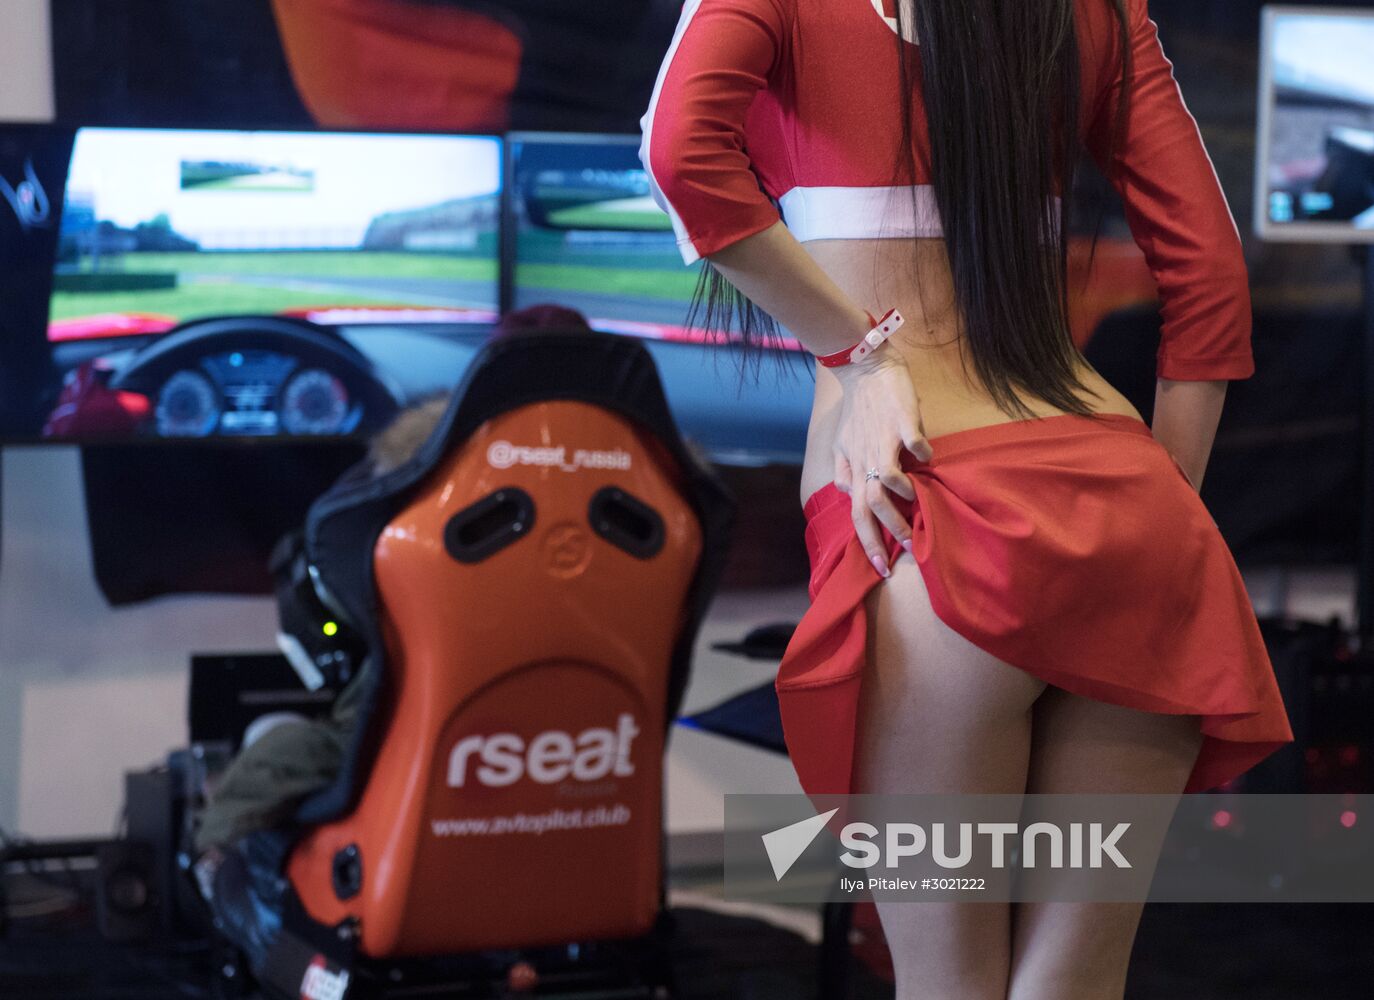 Russia's first Motorsport Expo